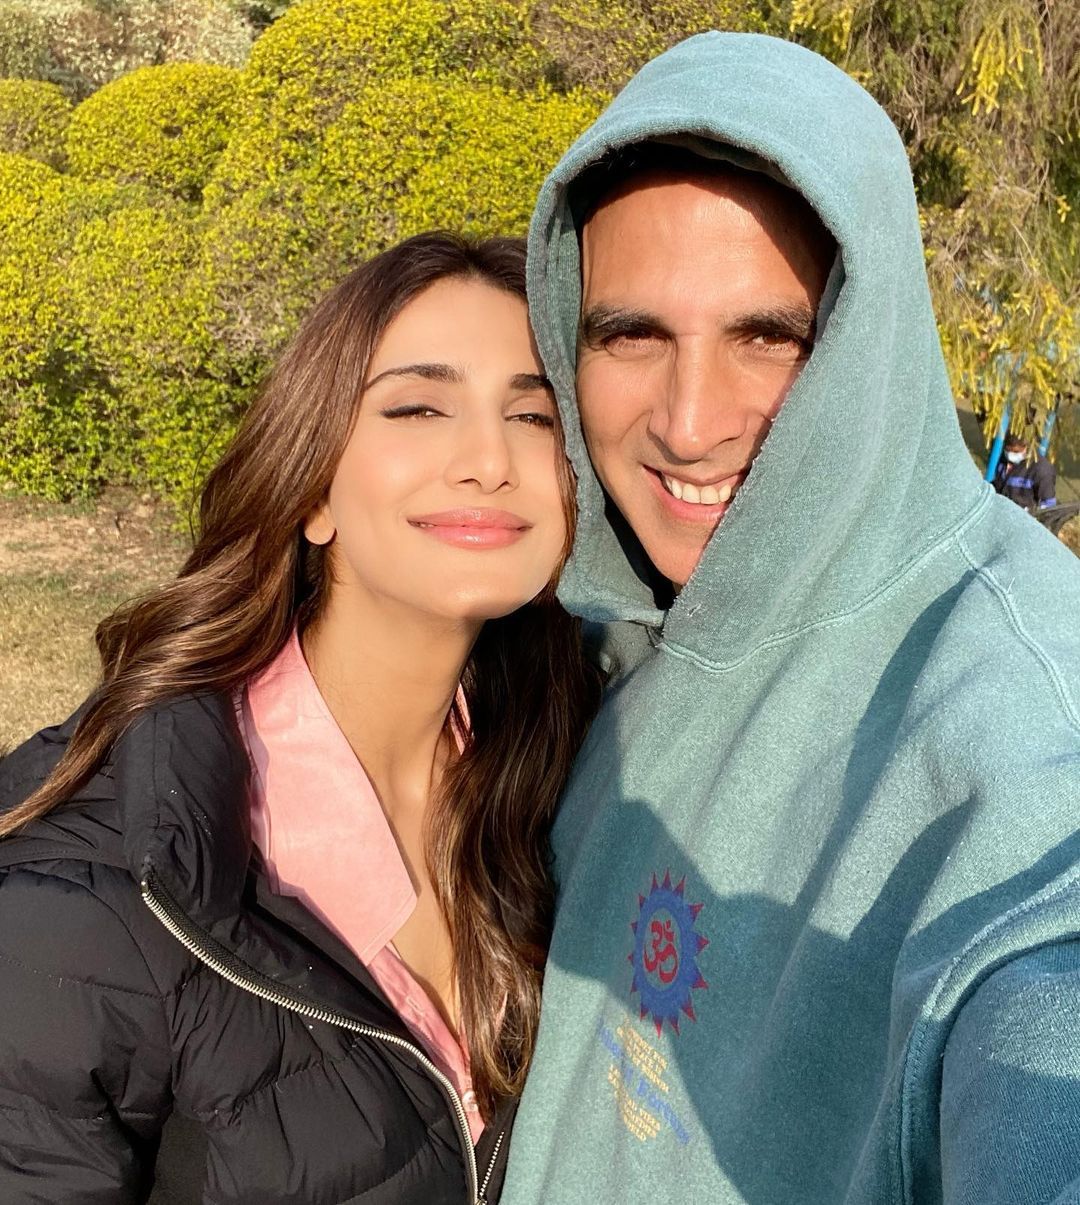 Bell Bottom star Vaani Kapoor reveals her father’s reaction to her working with Akshay Kumar